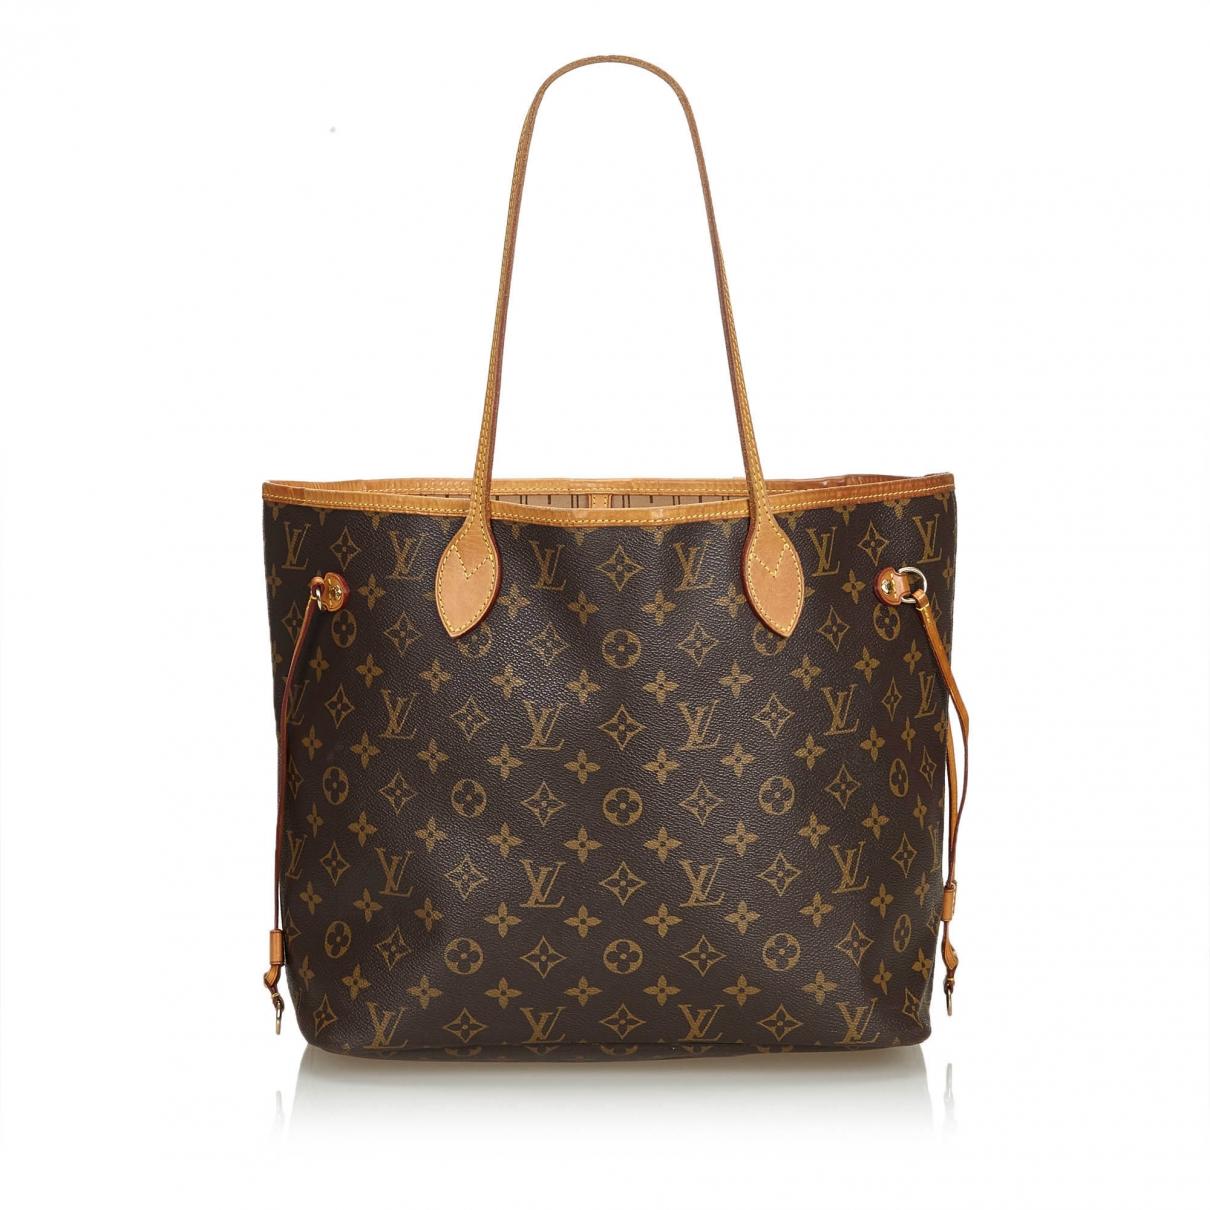 Lyst - Louis Vuitton Pre-owned Neverfull Brown Cloth Handbags in Brown - Save 4%